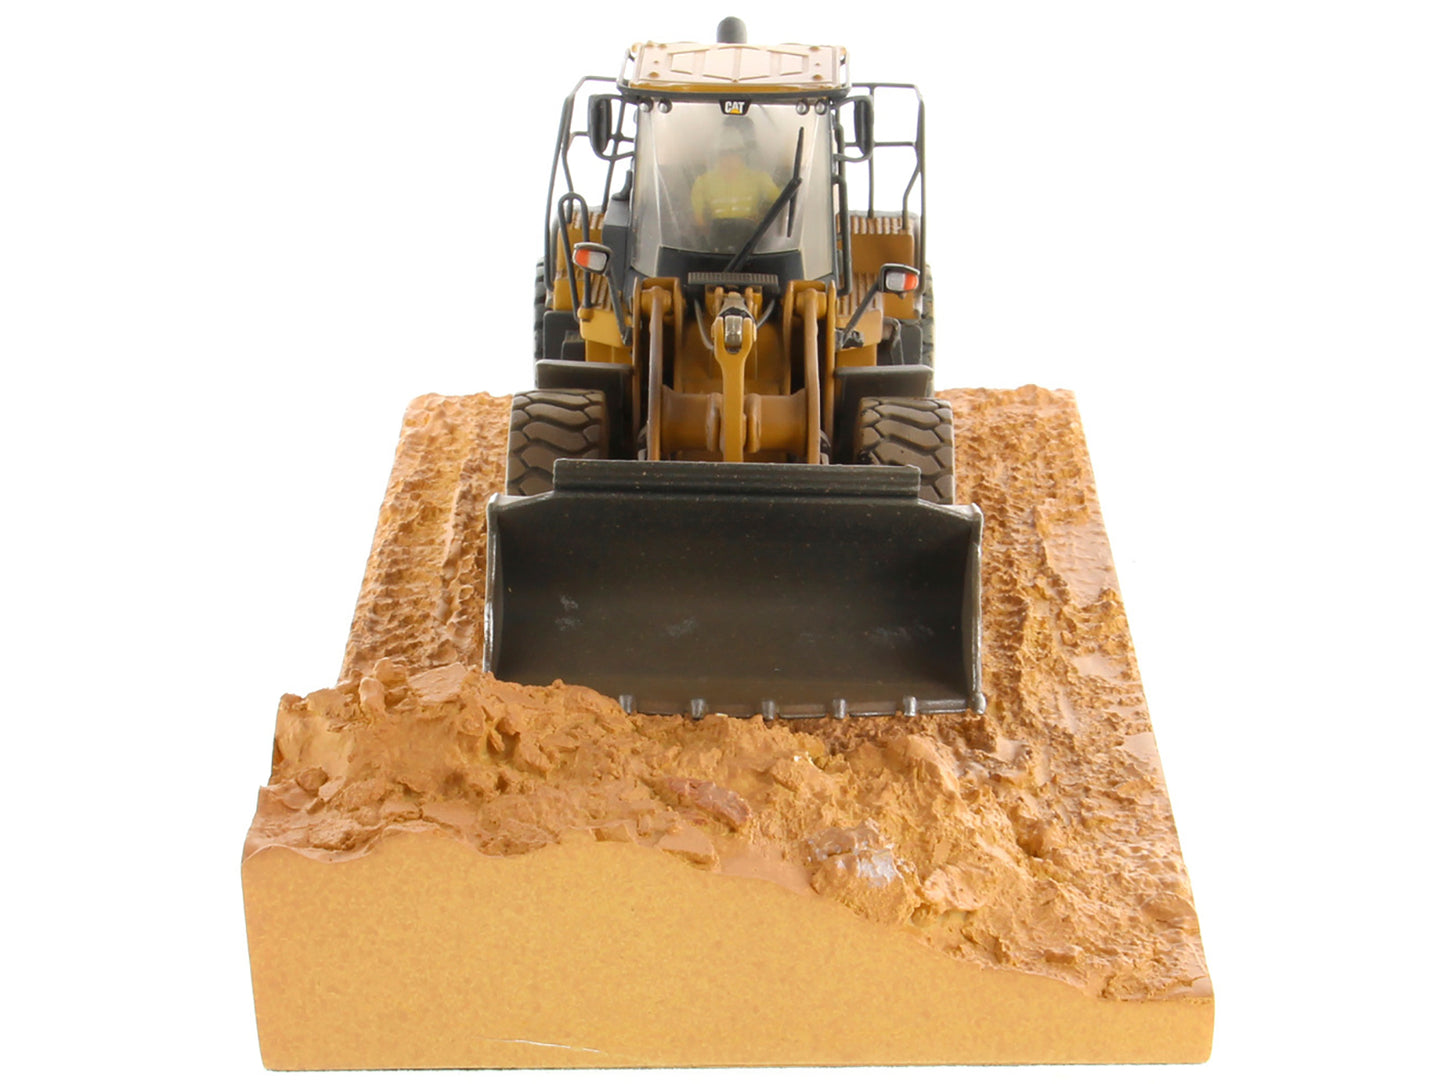 cat 966m loader dirty weathered 1/50 diecast model